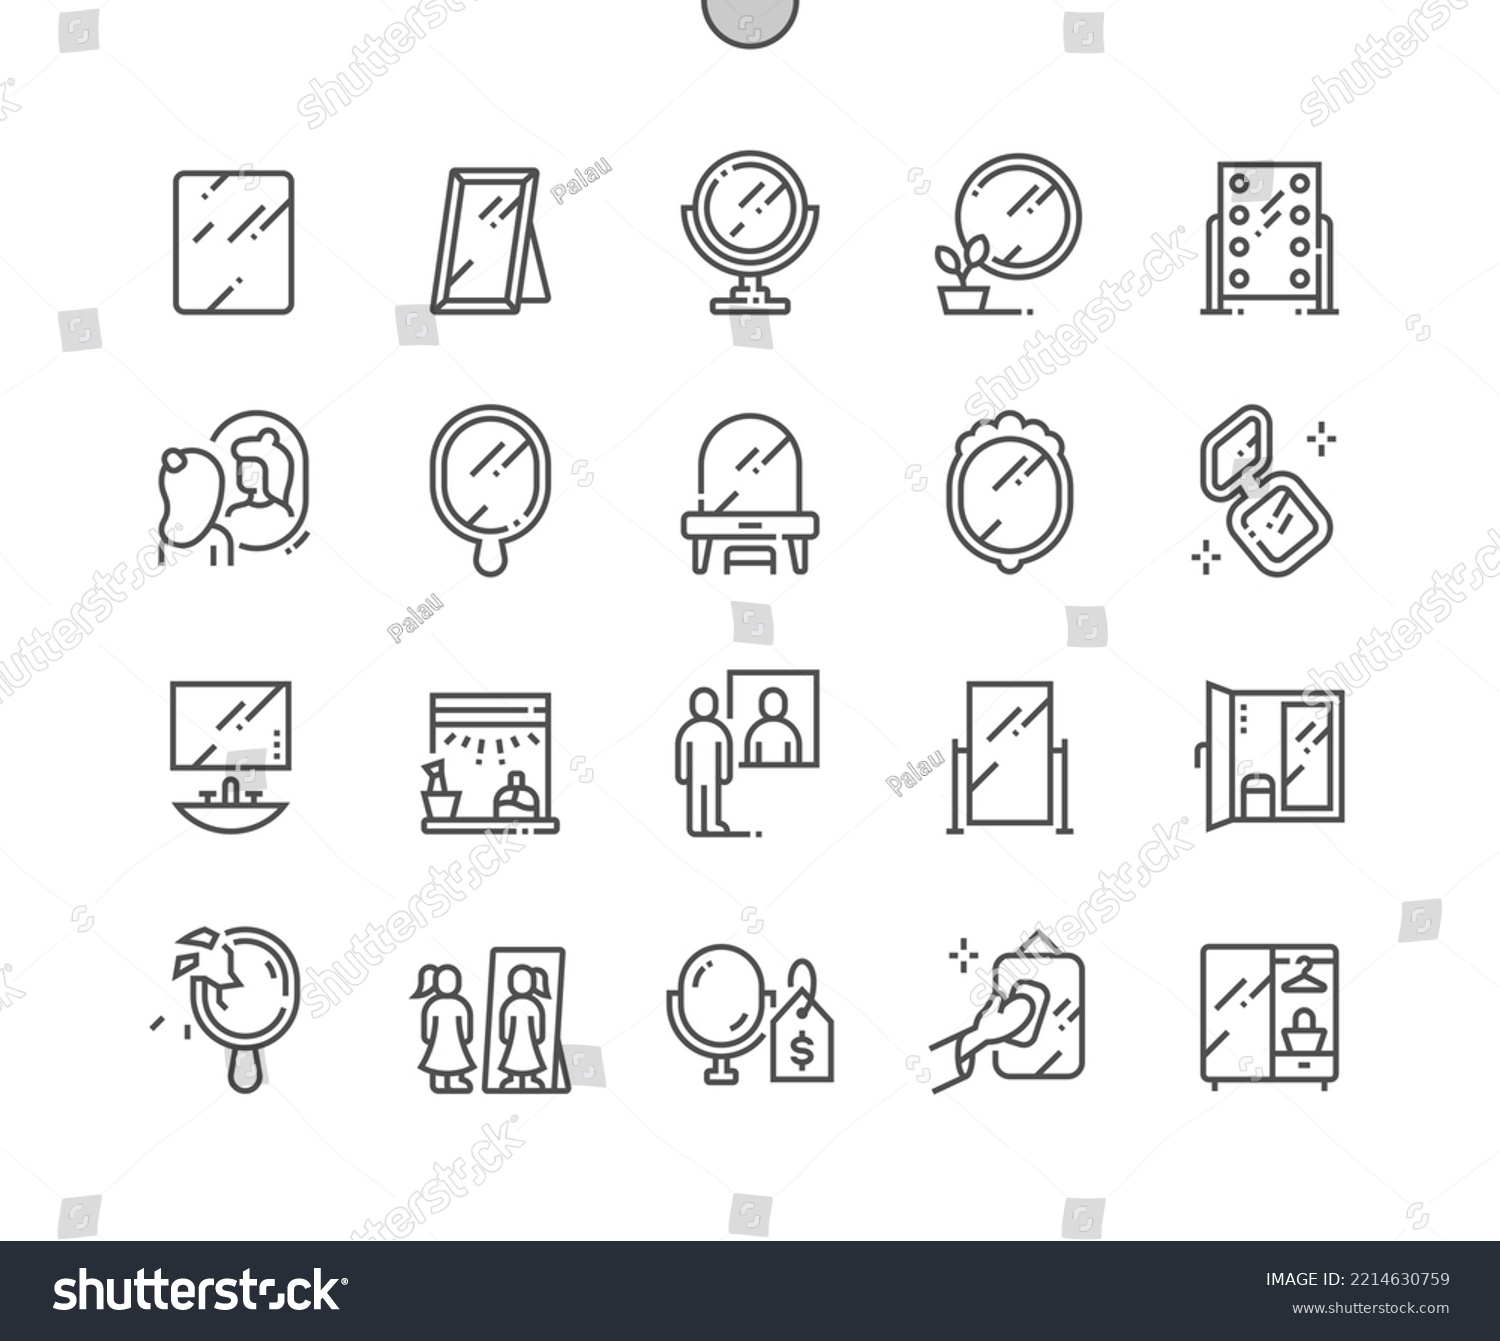 SVG of Mirror. Self reflection. Various mirrors - round, makeup, full length, bathroom interior. Furniture store. Pixel Perfect Vector Thin Line Icons. Simple Minimal Pictogram svg